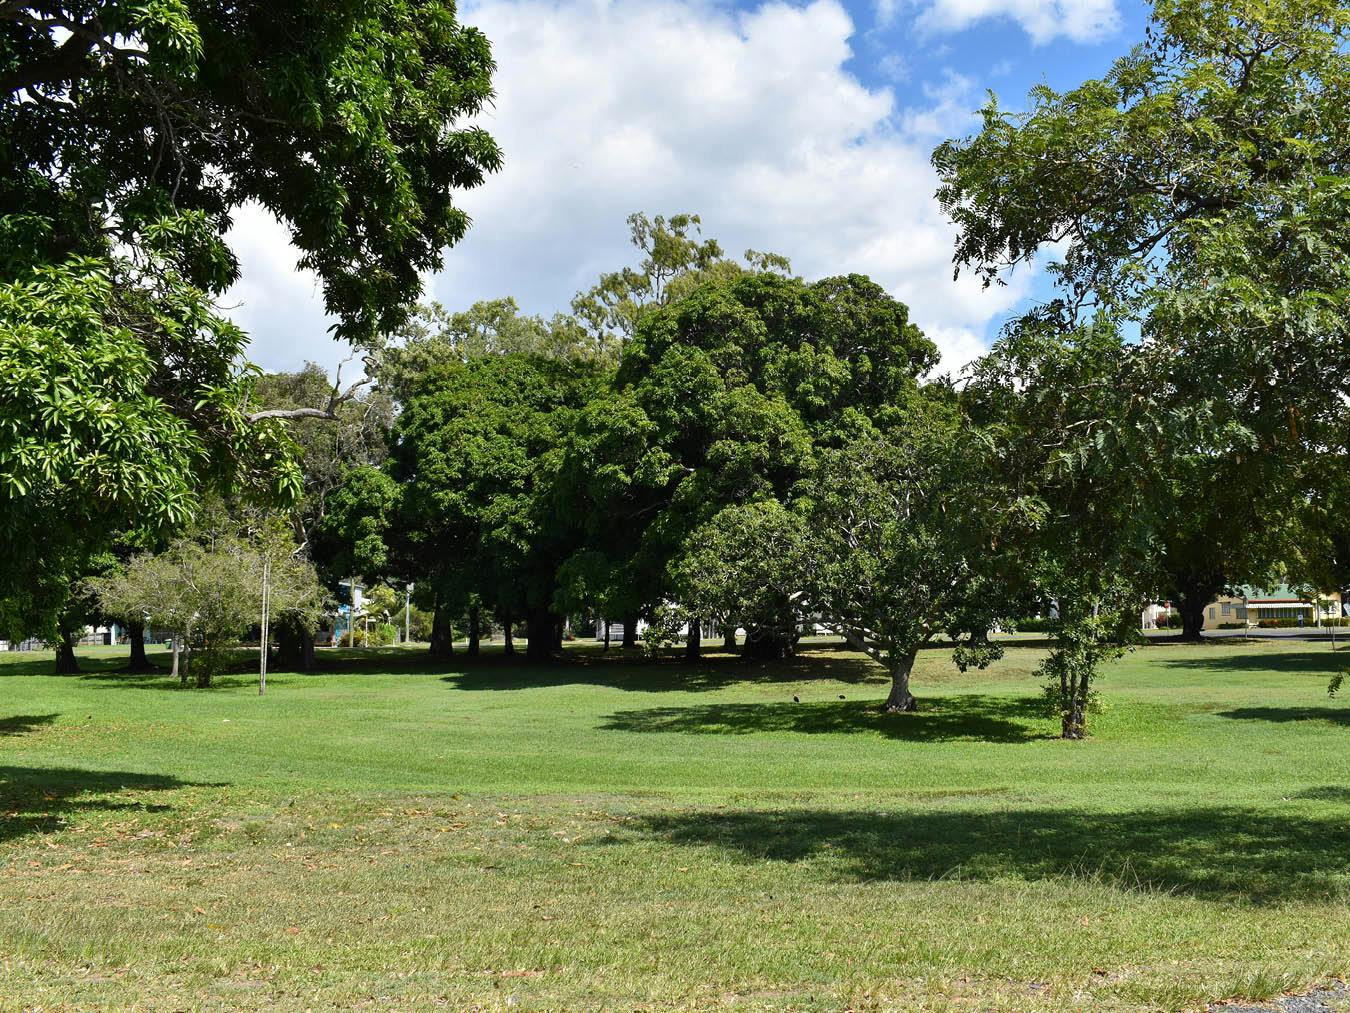 Seaforth Esplanade Road - This photograph is looking south across the esplanade's park towards Palm Avenue. 